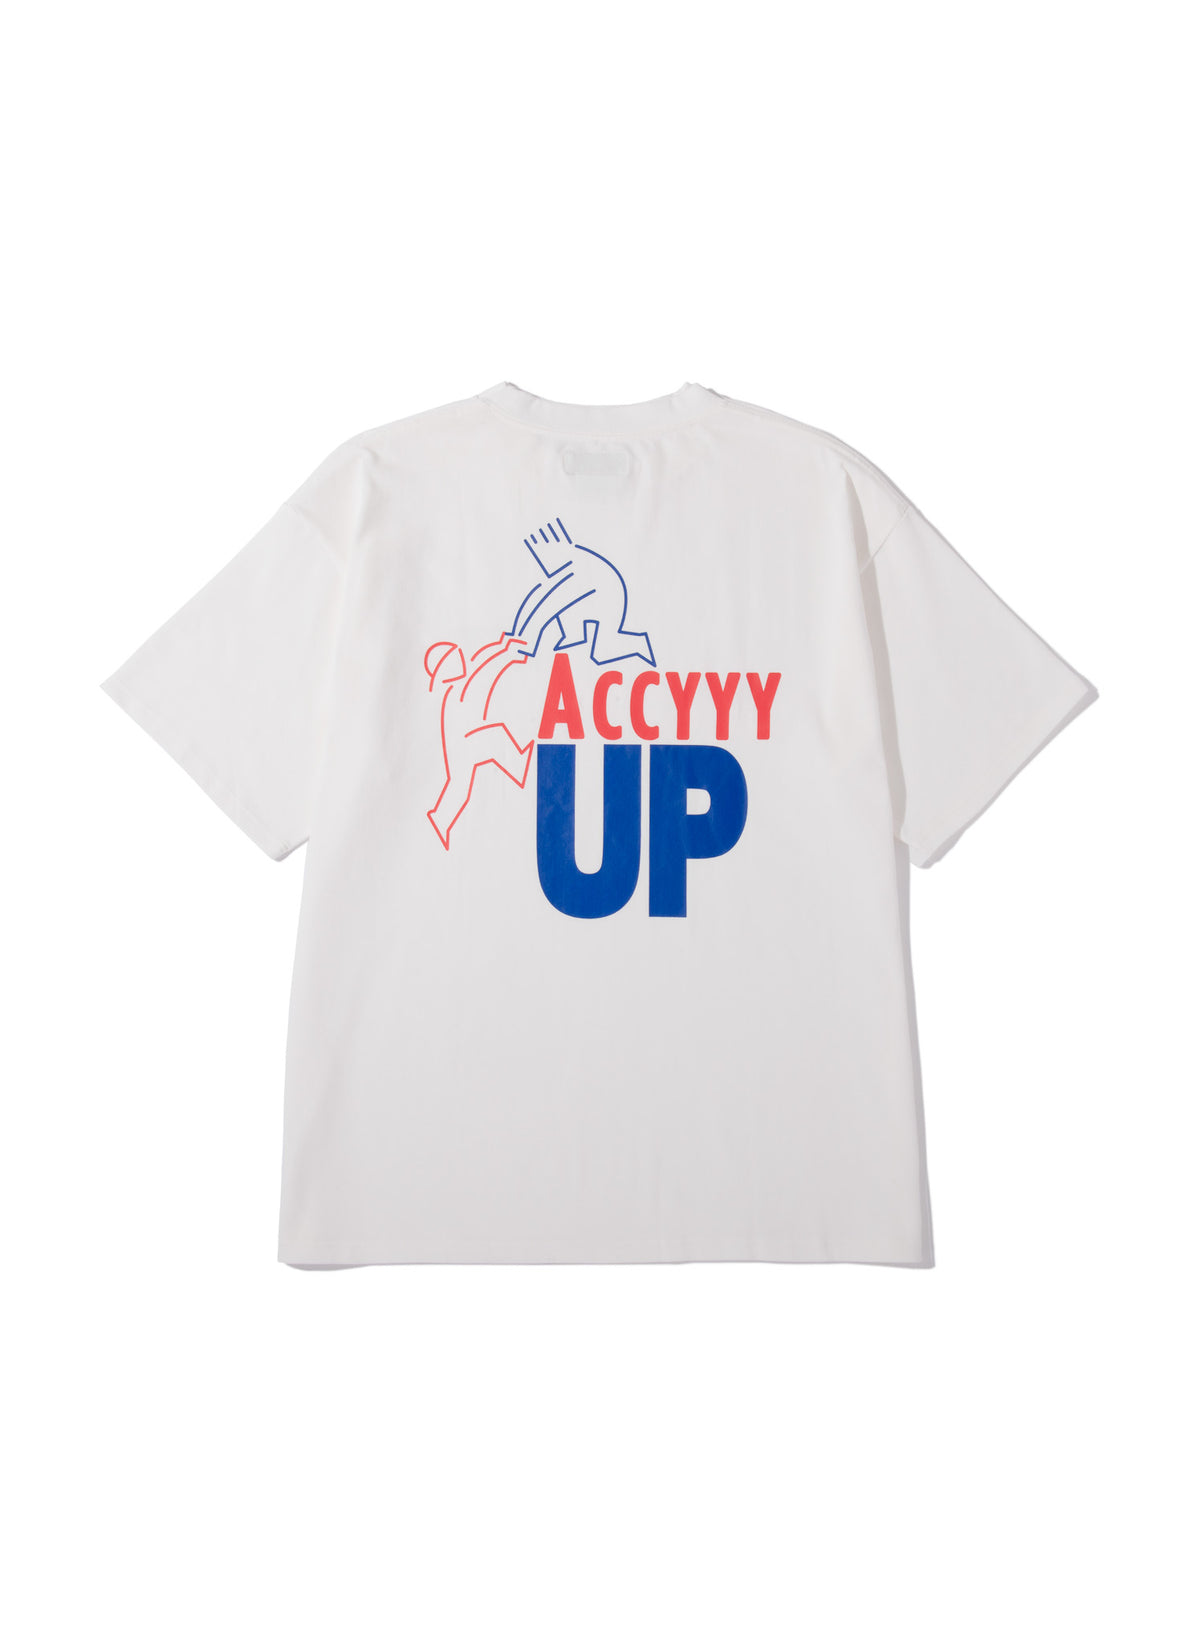 <span style="color: #f50b0b;">Last One</span> Acy / UP TEE WHITE